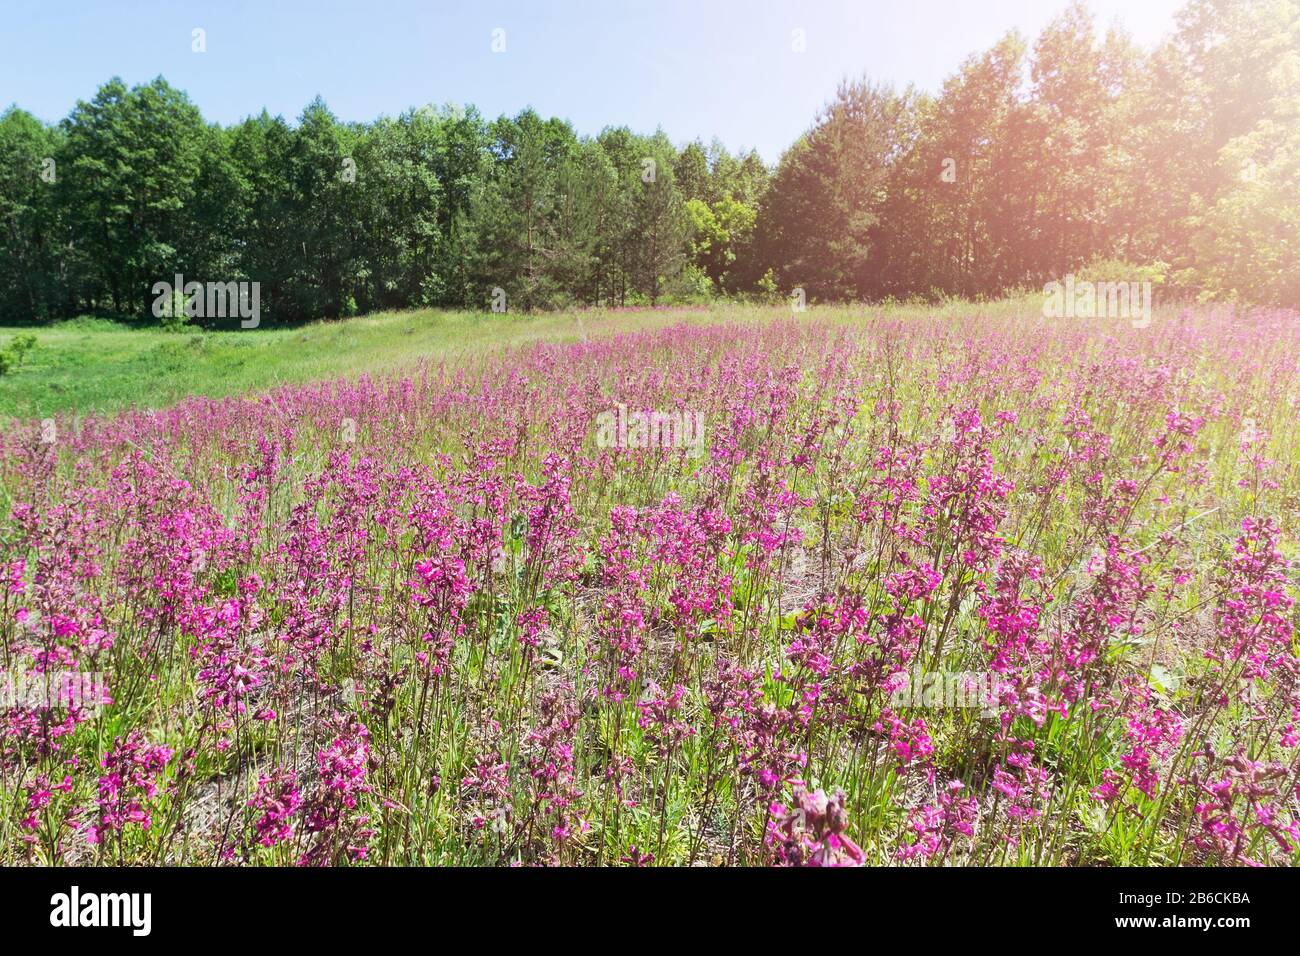 Landscape with a blooming field of red wild cloves Stock Photo